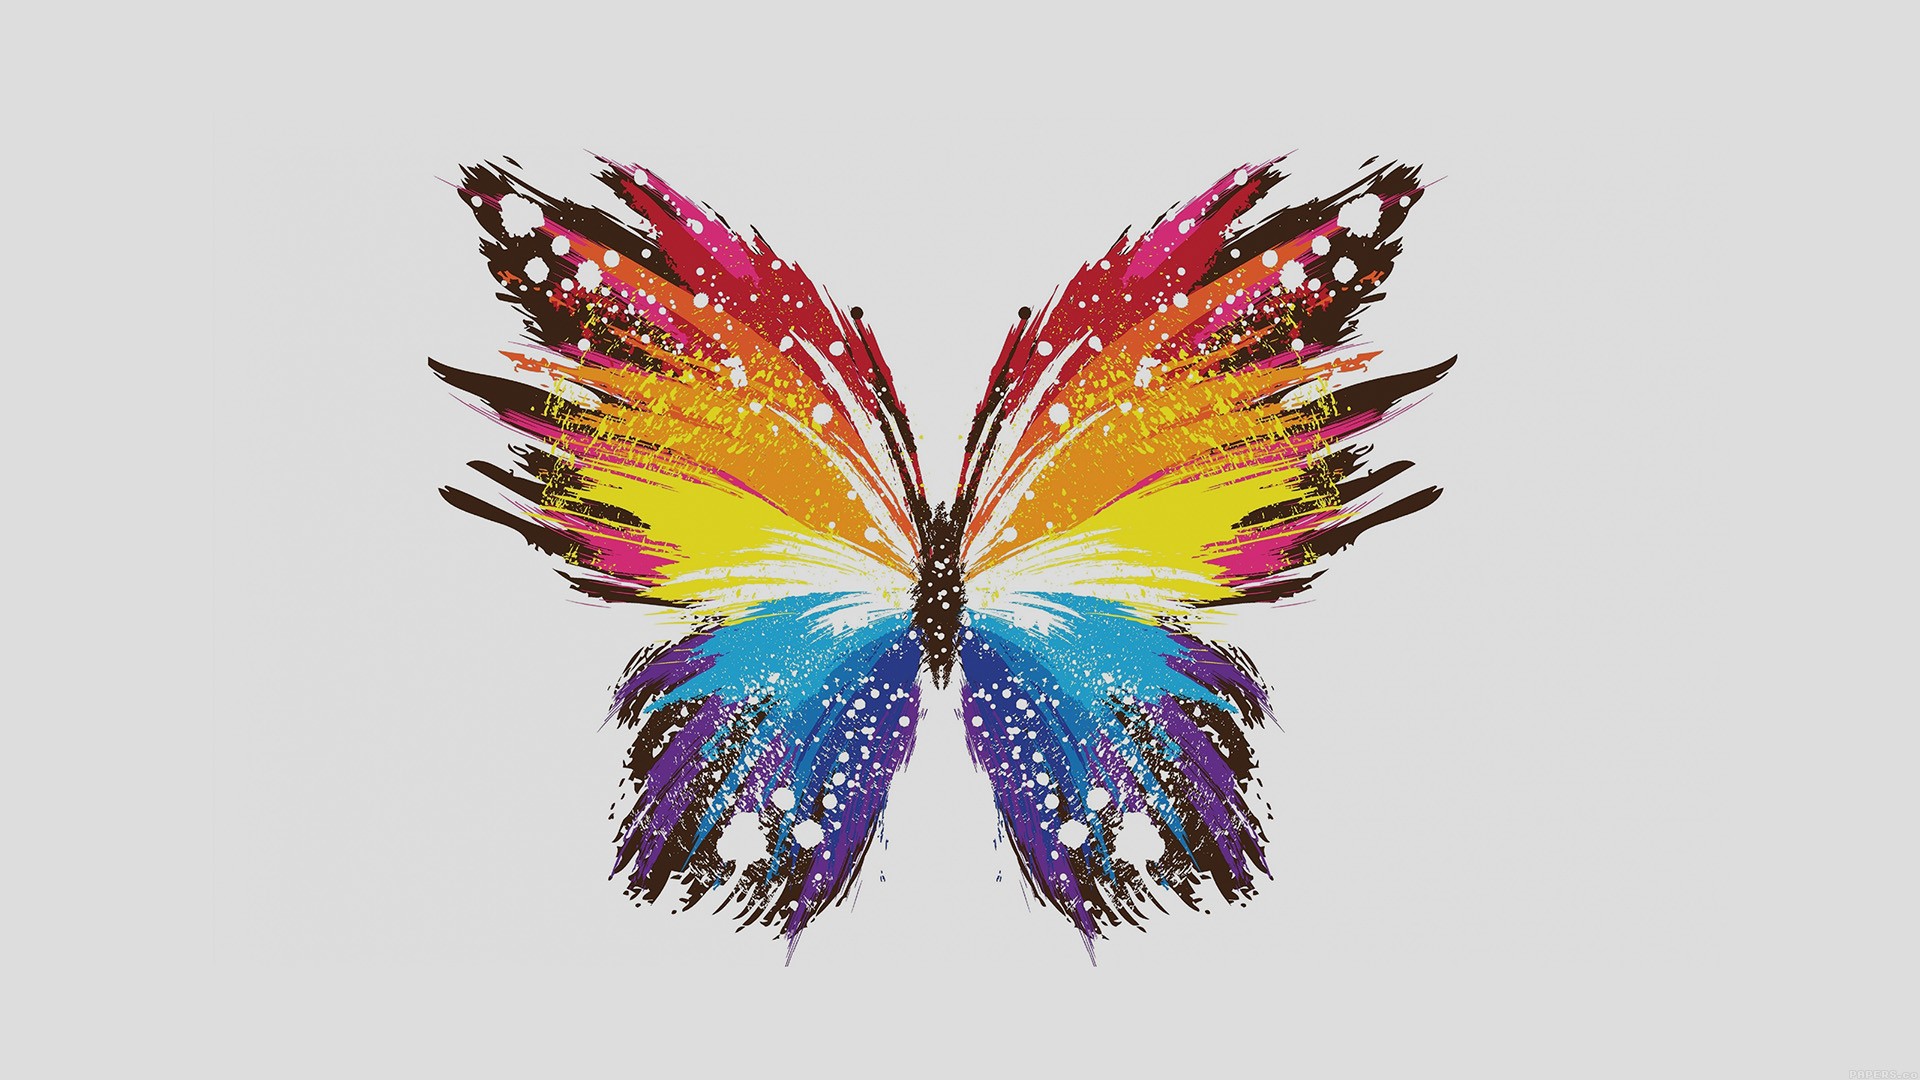 digital Art, Simple Background, Minimalism, Butterfly, Simple, Paint Splatter, Wings, Colorful, White Background Wallpaper